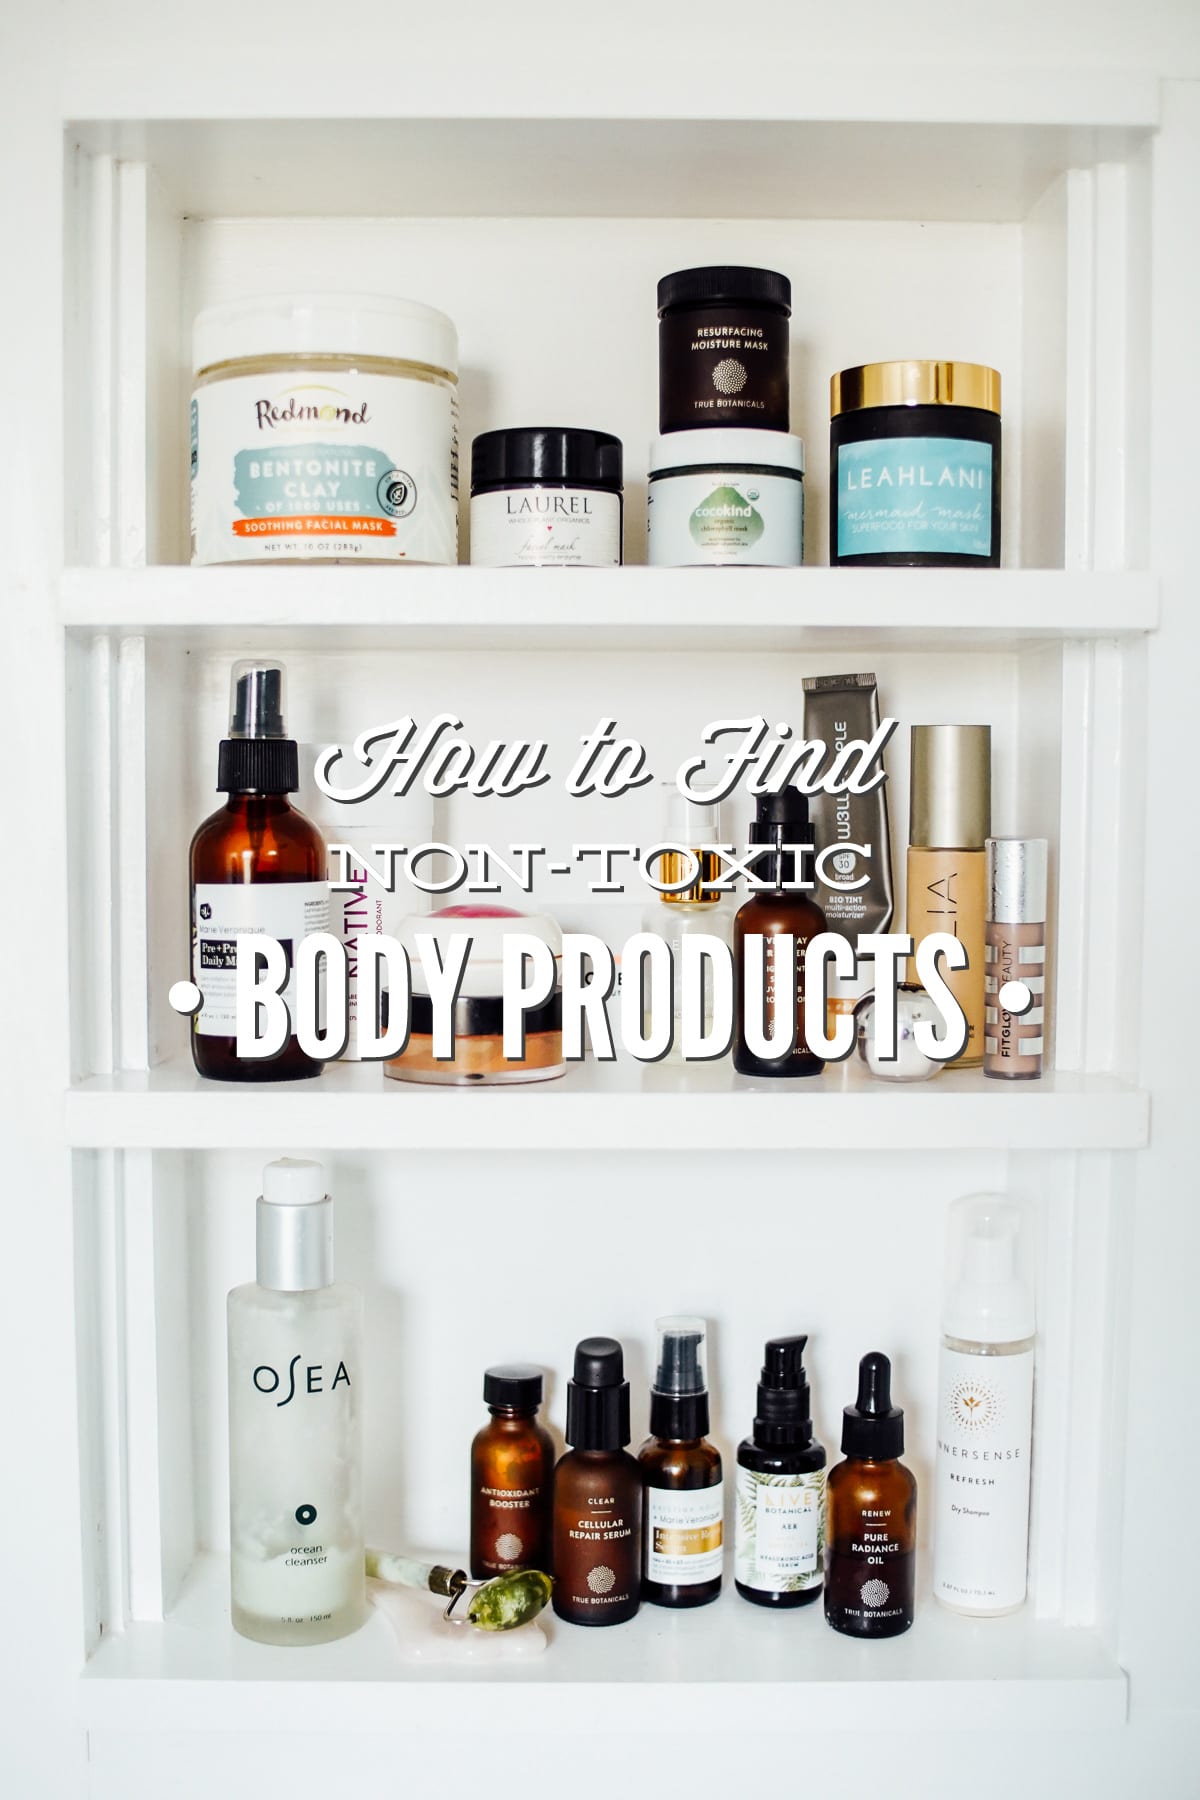 Where and How to Find Non-Toxic and Natural Skincare (and Body) Products